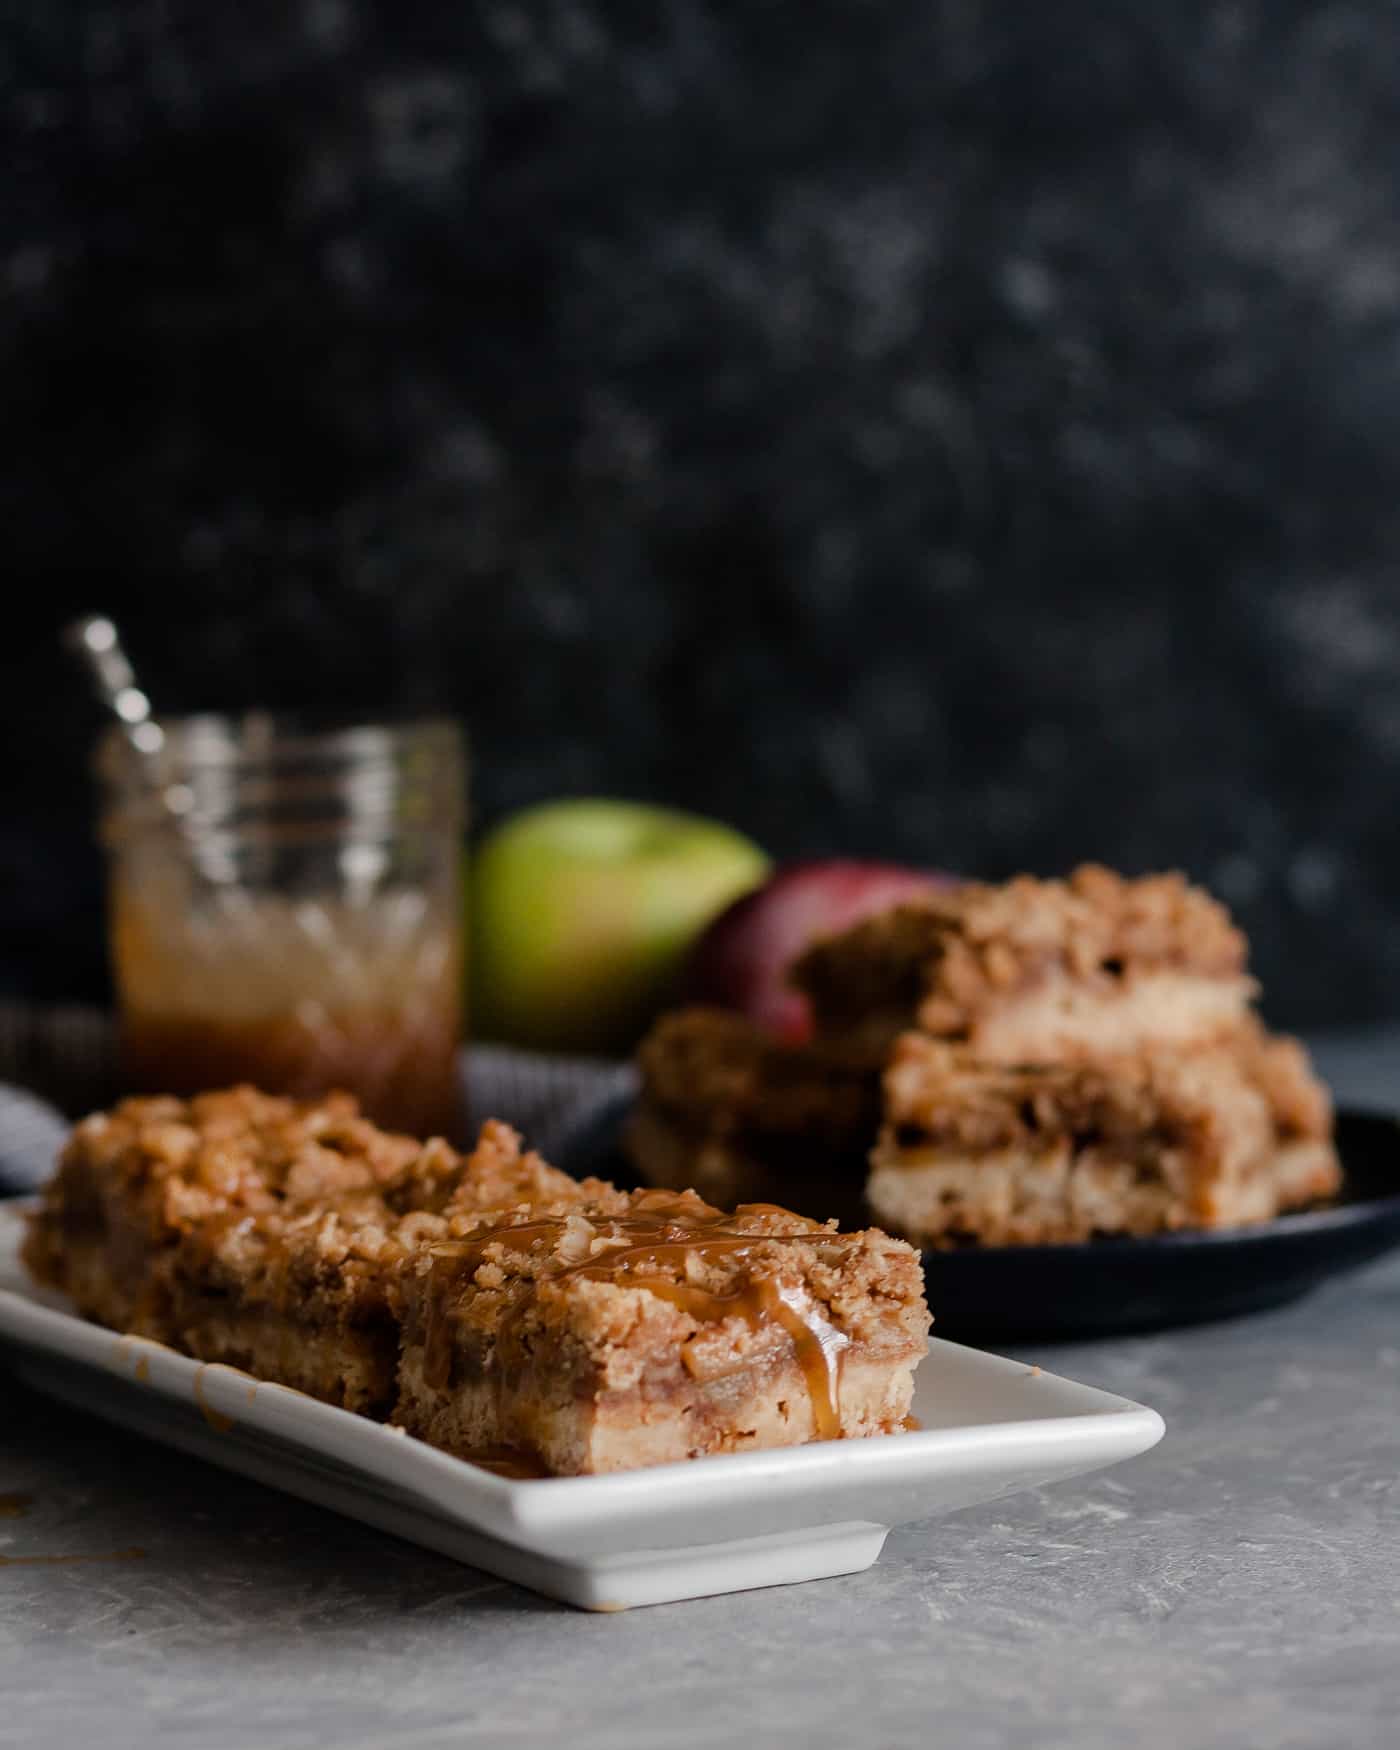 These popular caramel apple bars are a go-to recipe for a crowd. Drips of caramel, loads of apple flavor, and browned butter make these bars a favorite dessert!  * Caramel Apple Bar Recipe on GoodieGodmother.com